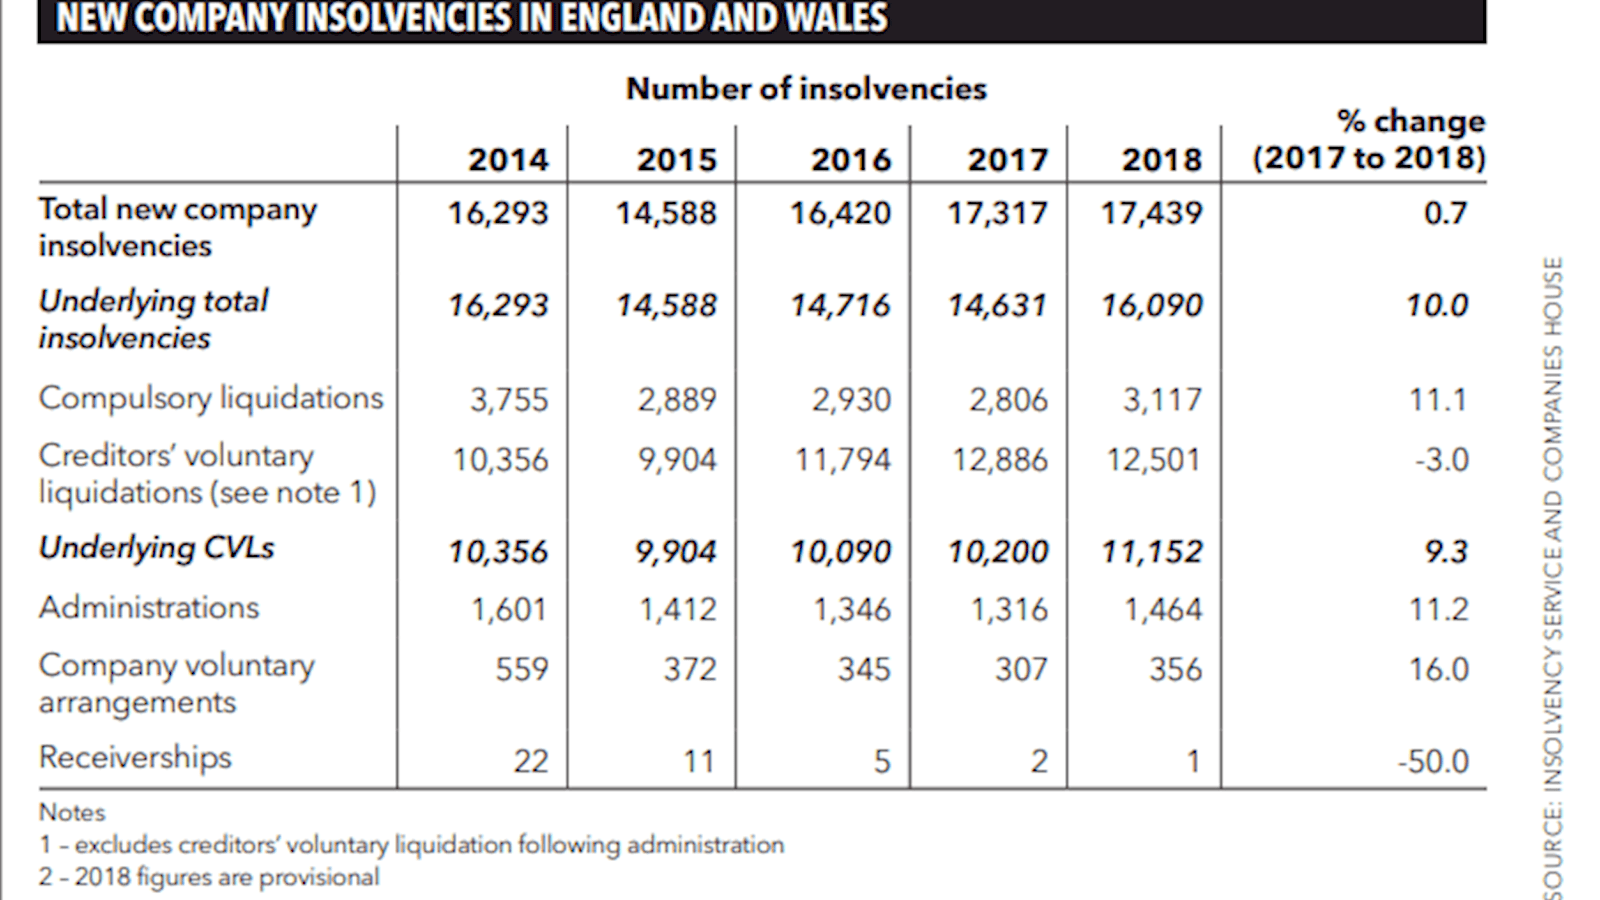 Figure 1: New company insolvencies in England and Wales